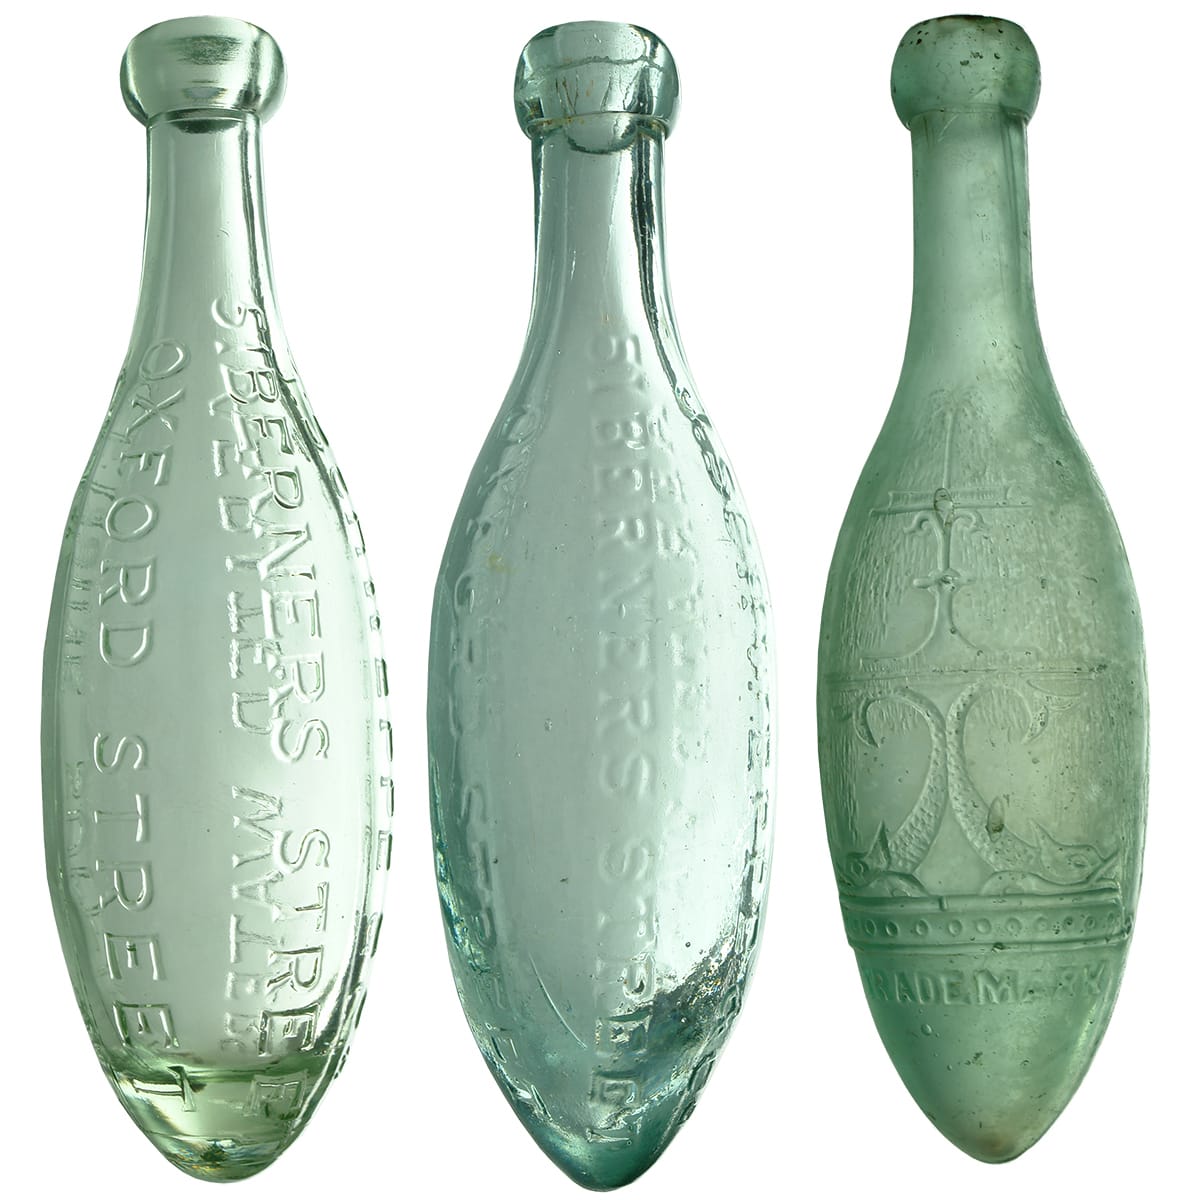 Three Schweppes Torpedo Bottles. Two old ones and a modern commemorative type.